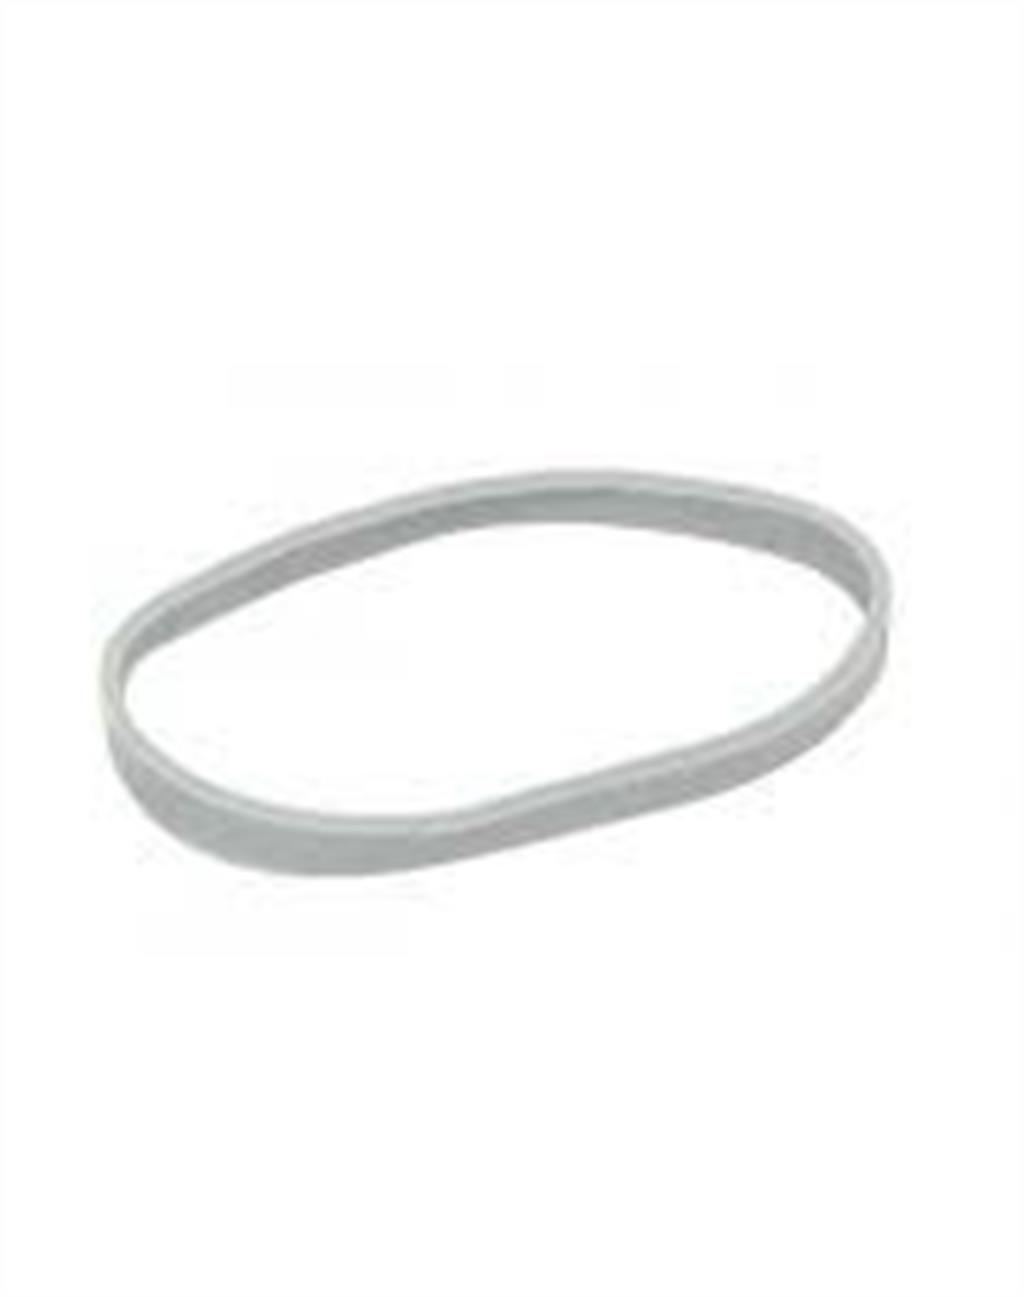 rubber-ring-wit-classic-100-x-10-x-2-mm-veneboercamping-drachten